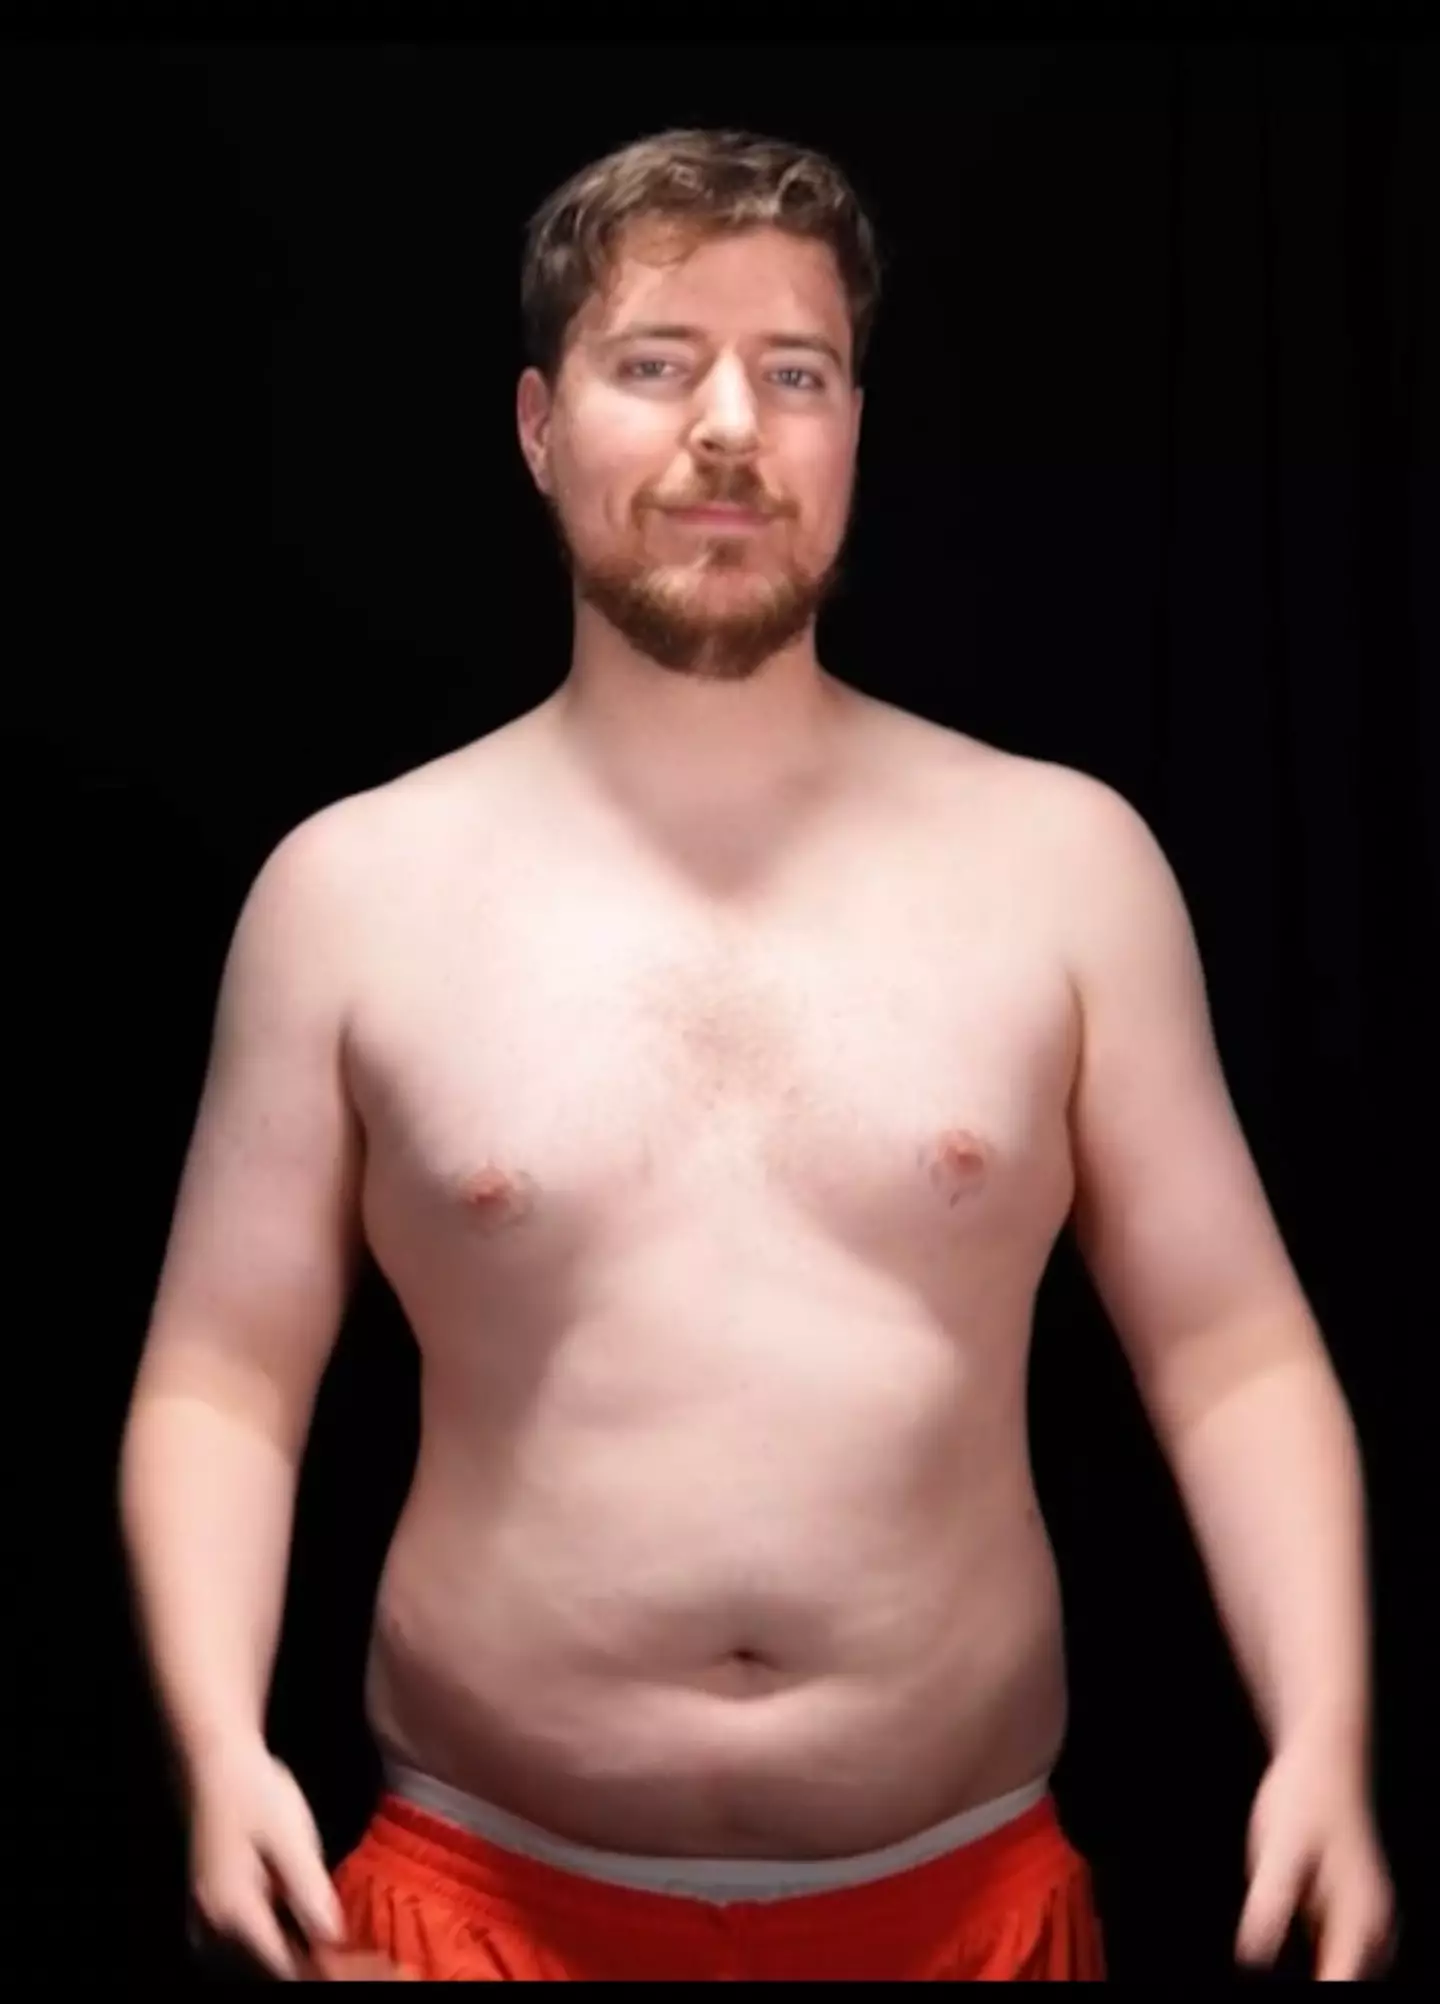 Here's the photo that made MrBeast want to start working out.